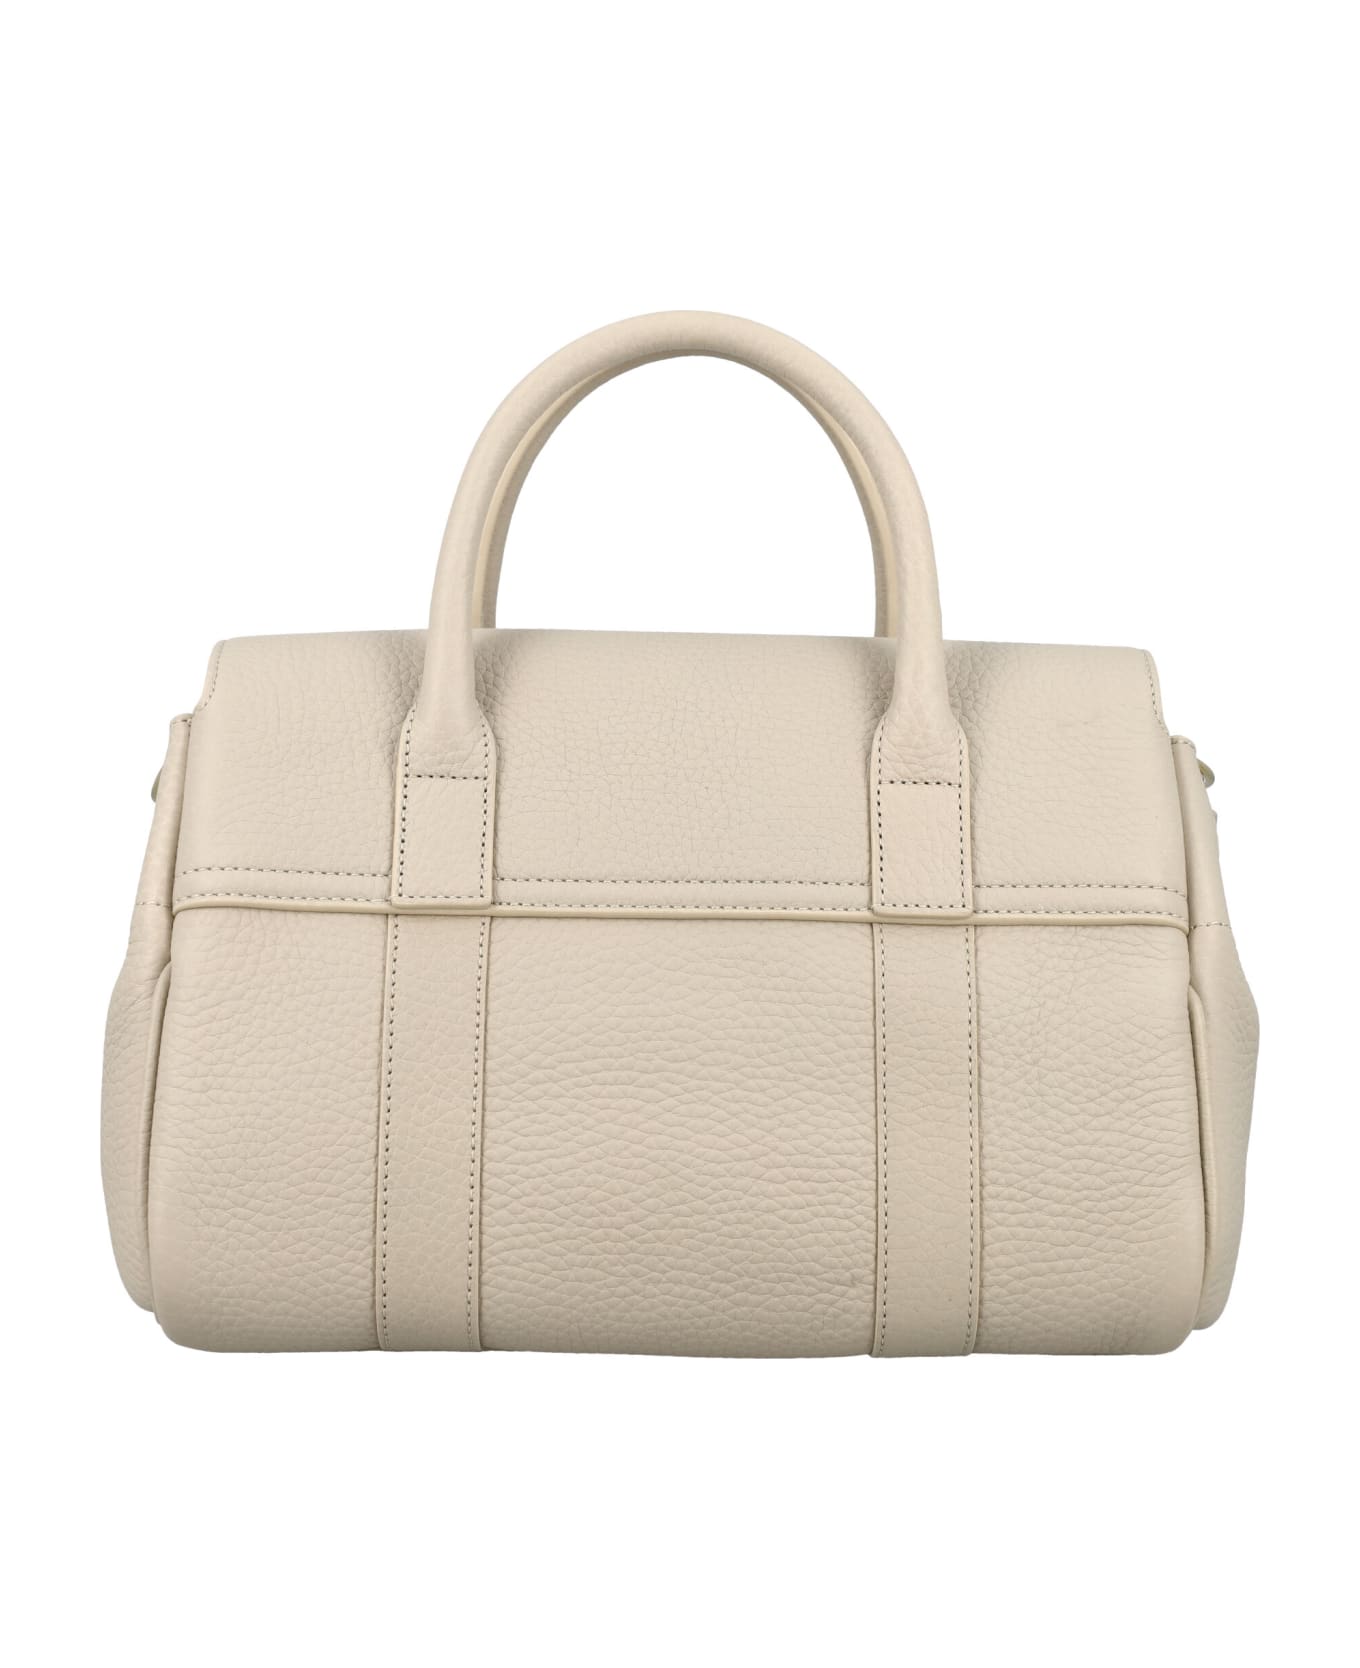 Mulberry Small Bayswater Satchel Hg - CHALK トートバッグ